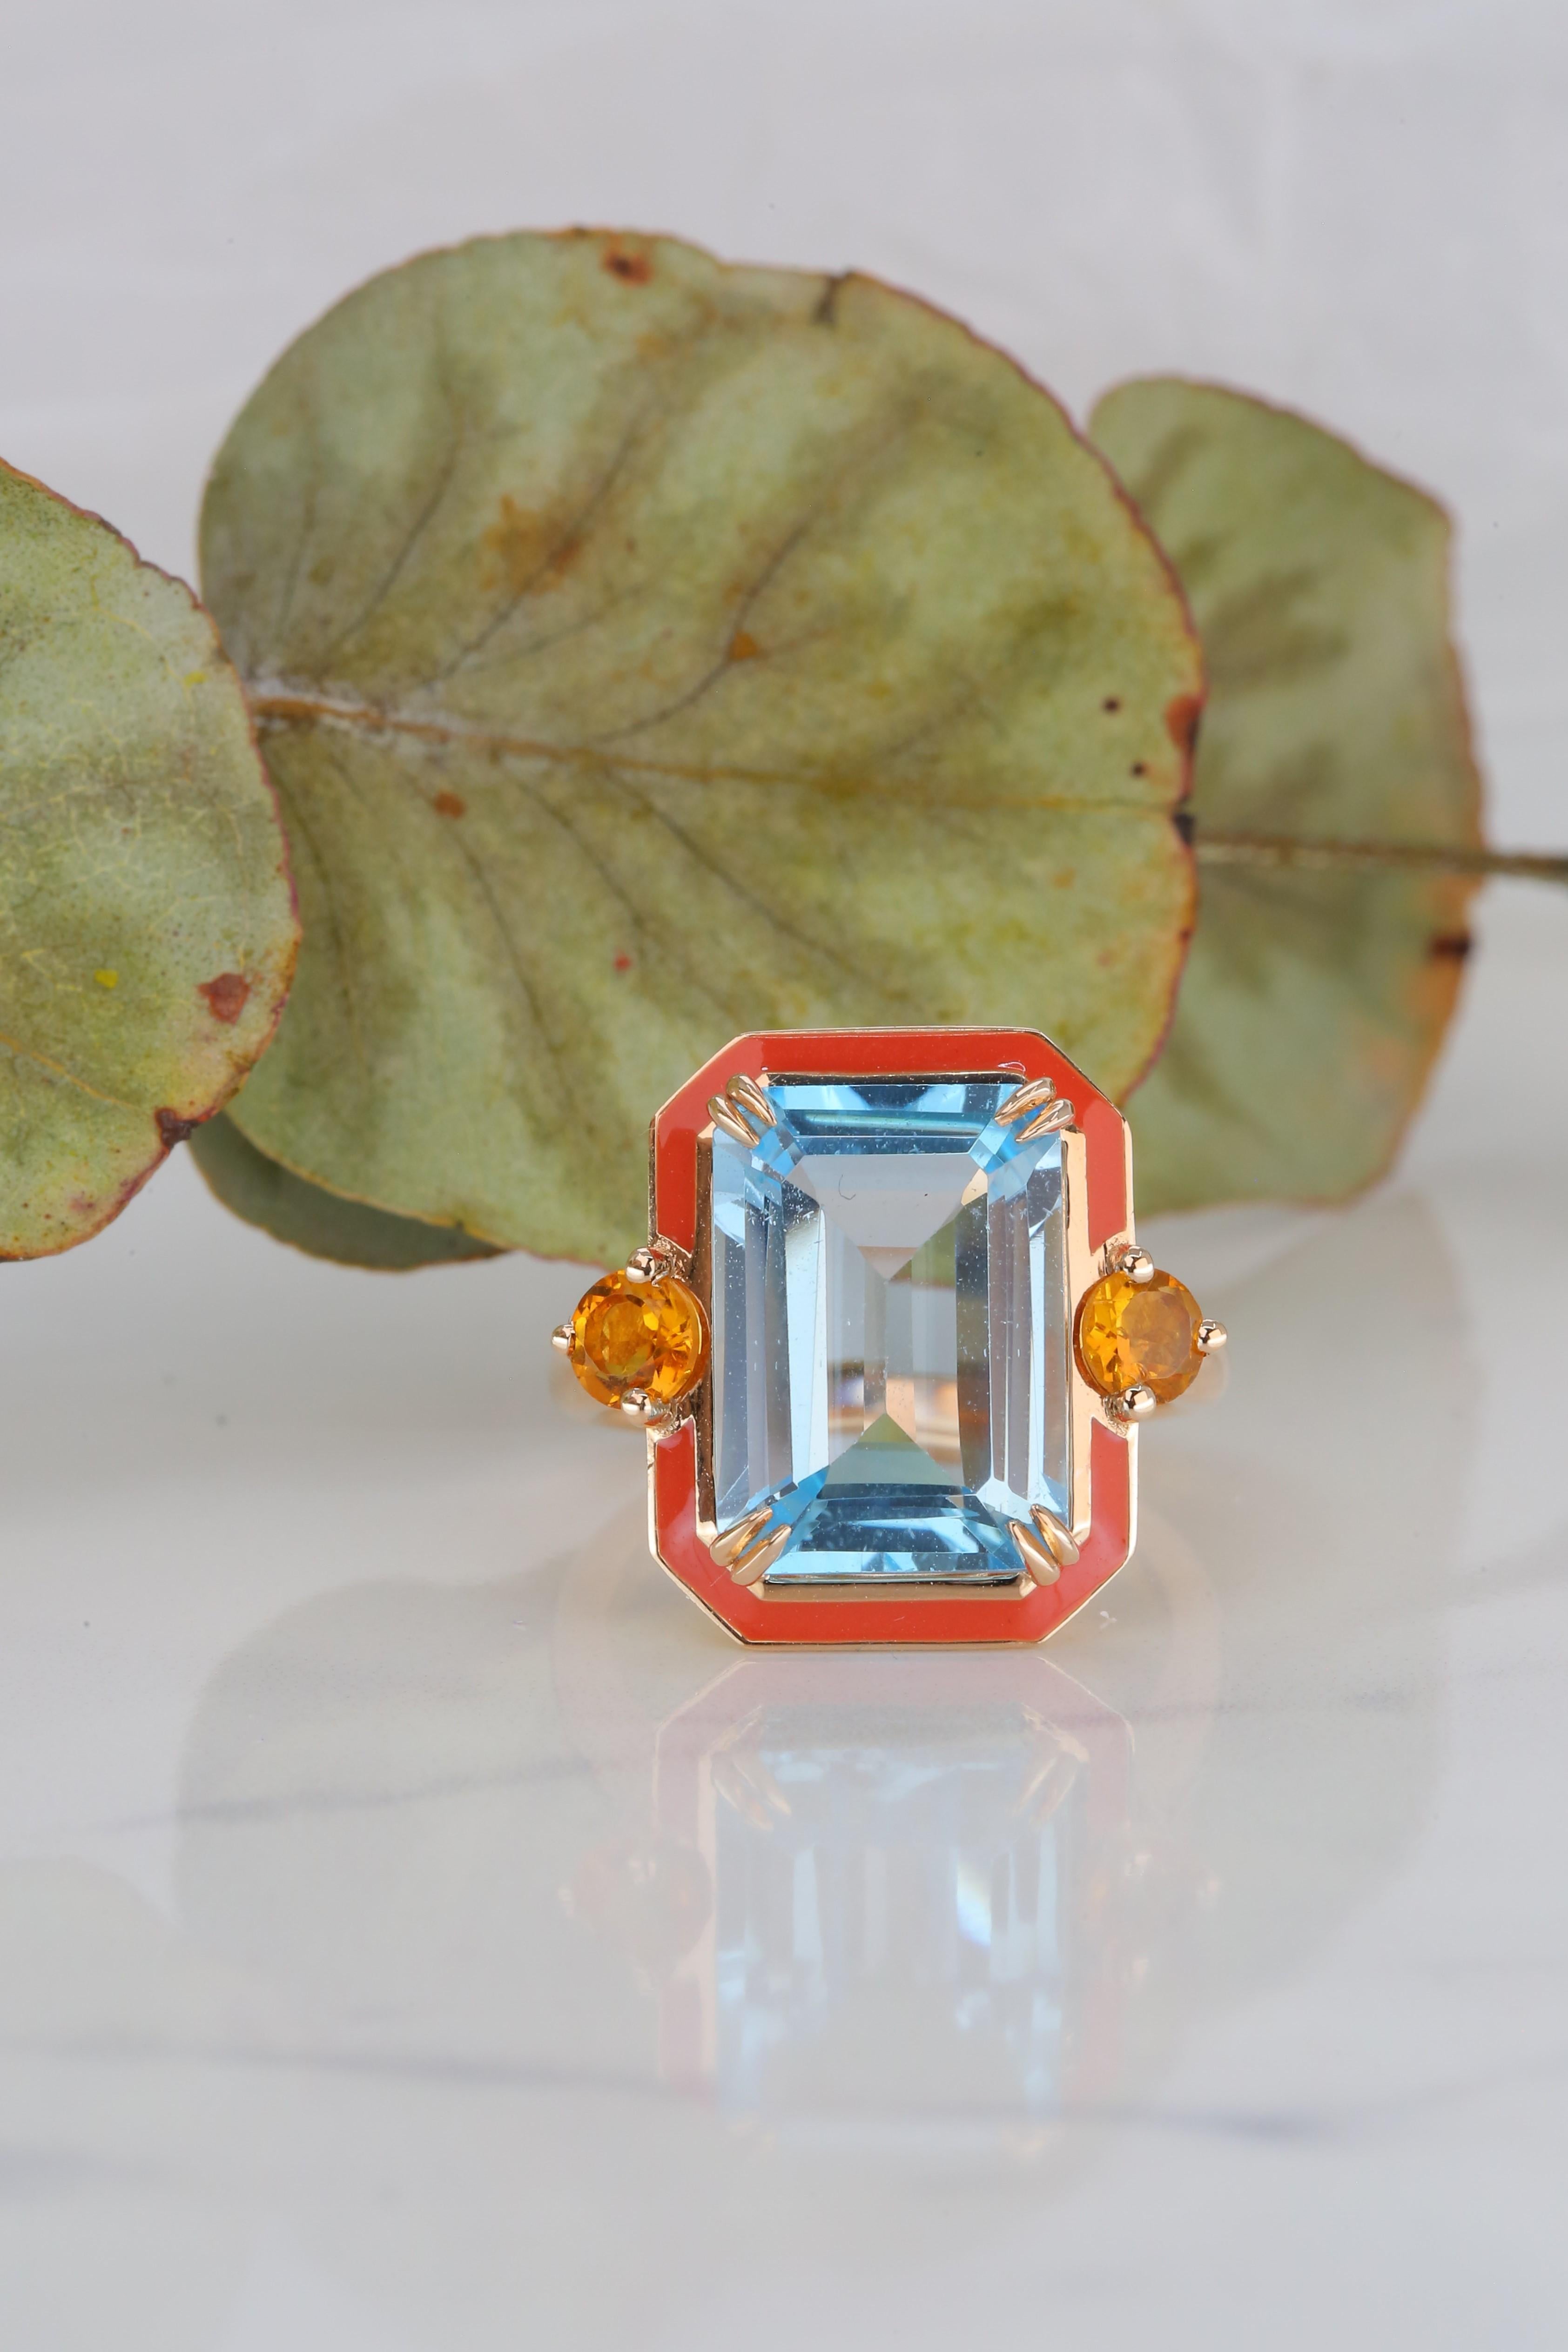 For Sale:  14K Gold Artdeco Style Enameled Cocktail Ring with 5.68 Ct Sky Topaz and Citrine 7